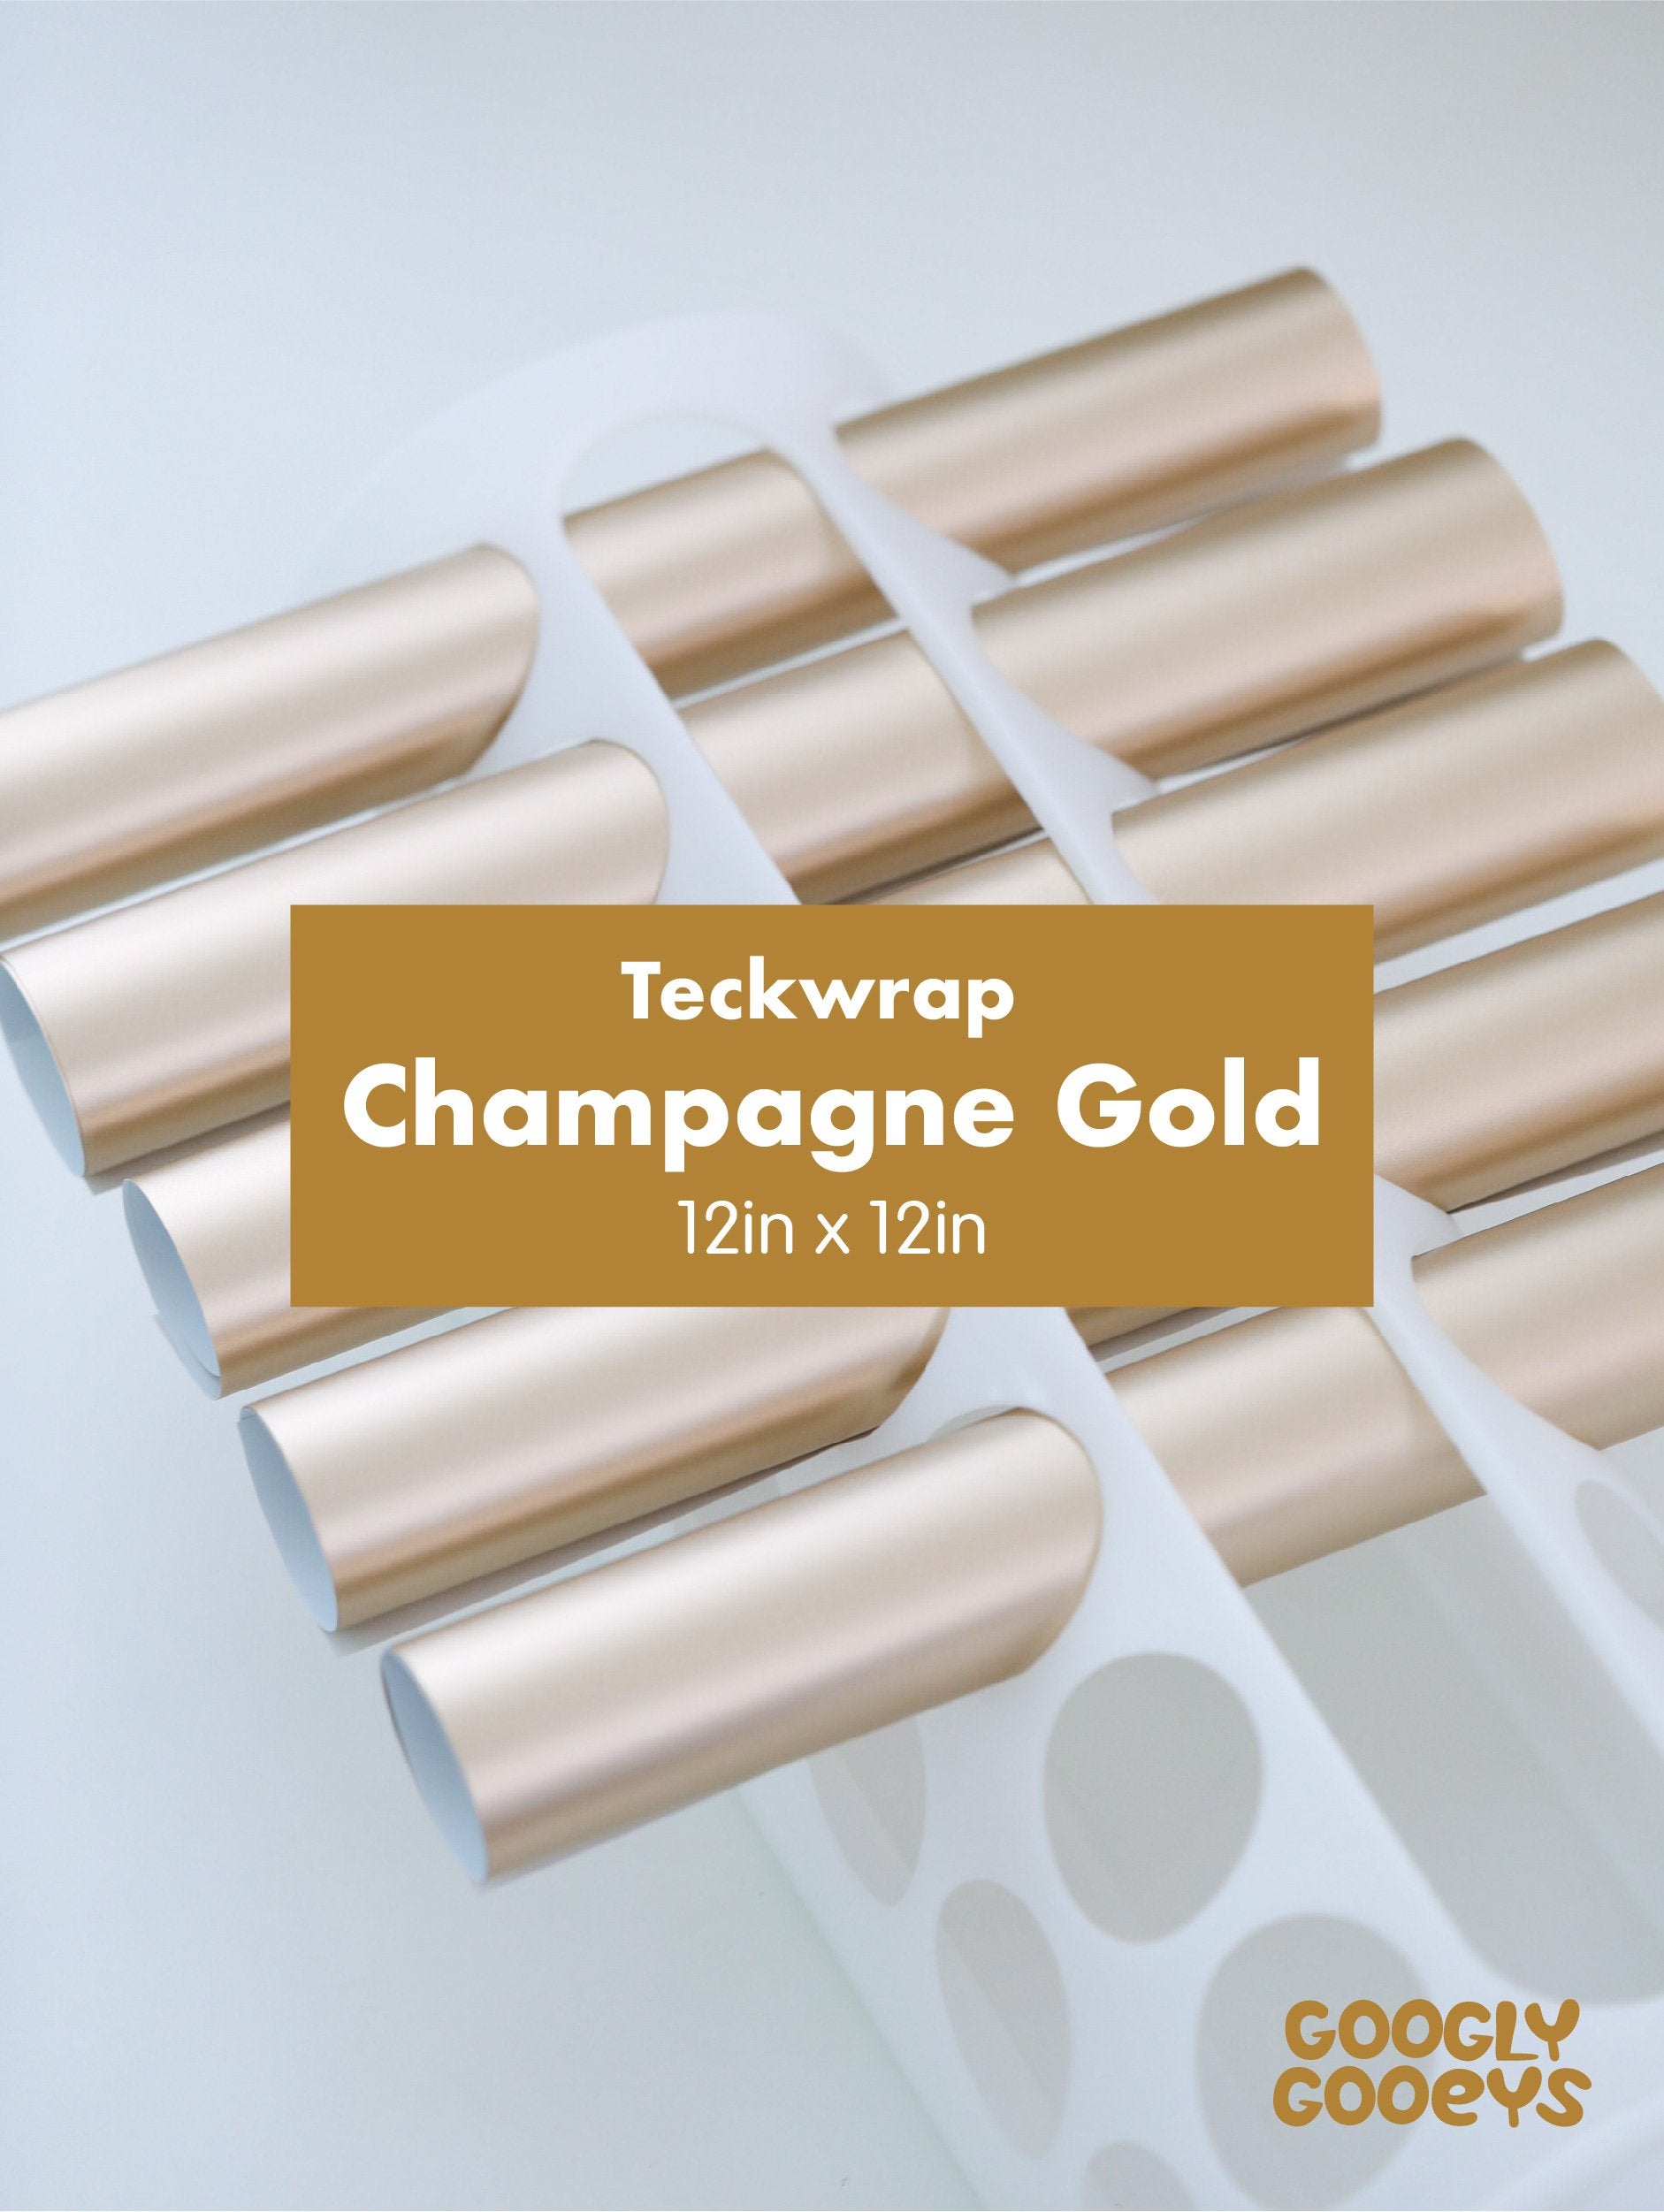 Teckwrap Gold Collection Adhesive Vinyl Stickers